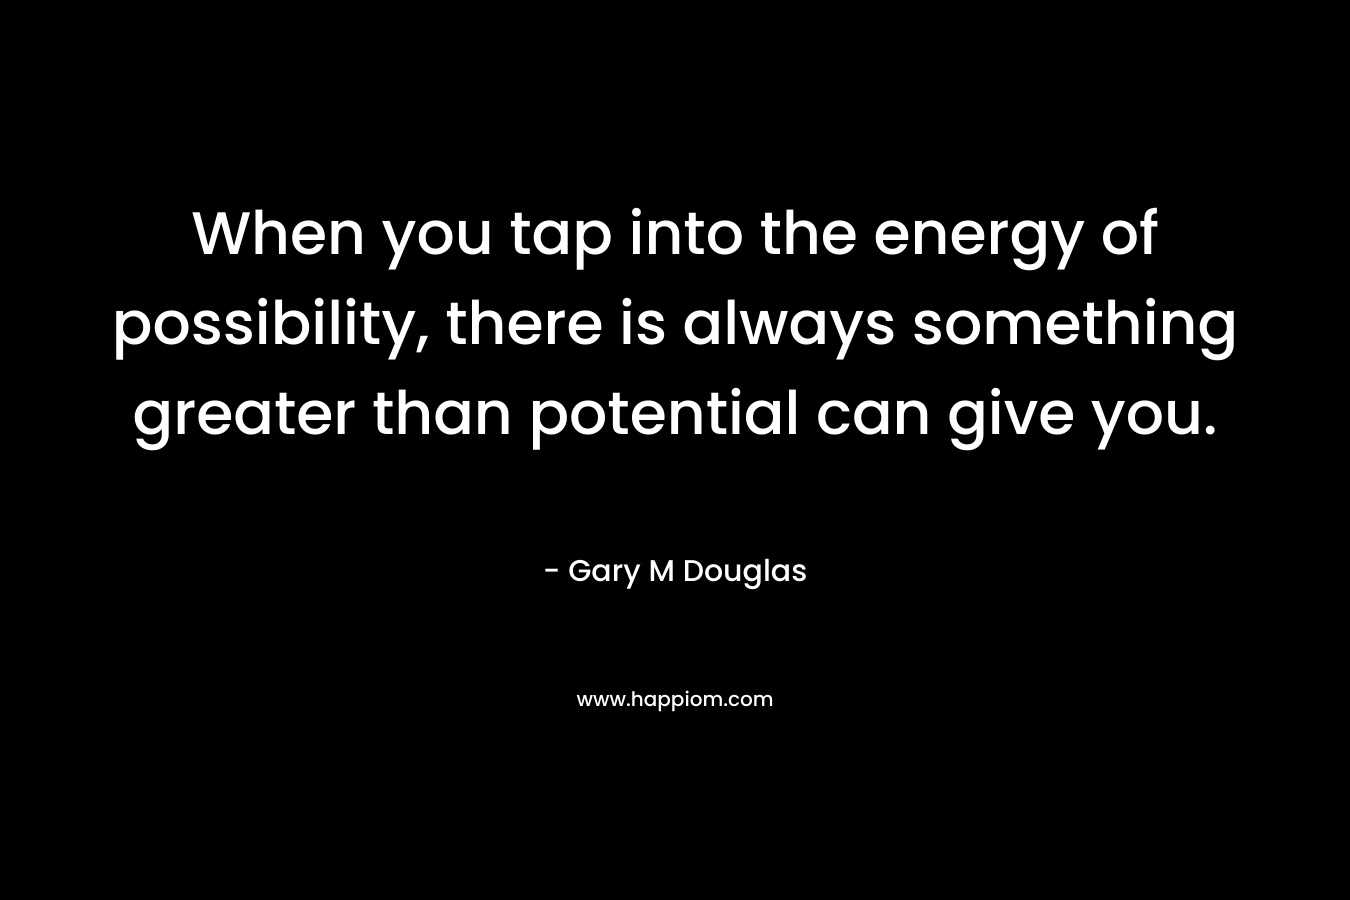 When you tap into the energy of possibility, there is always something greater than potential can give you.